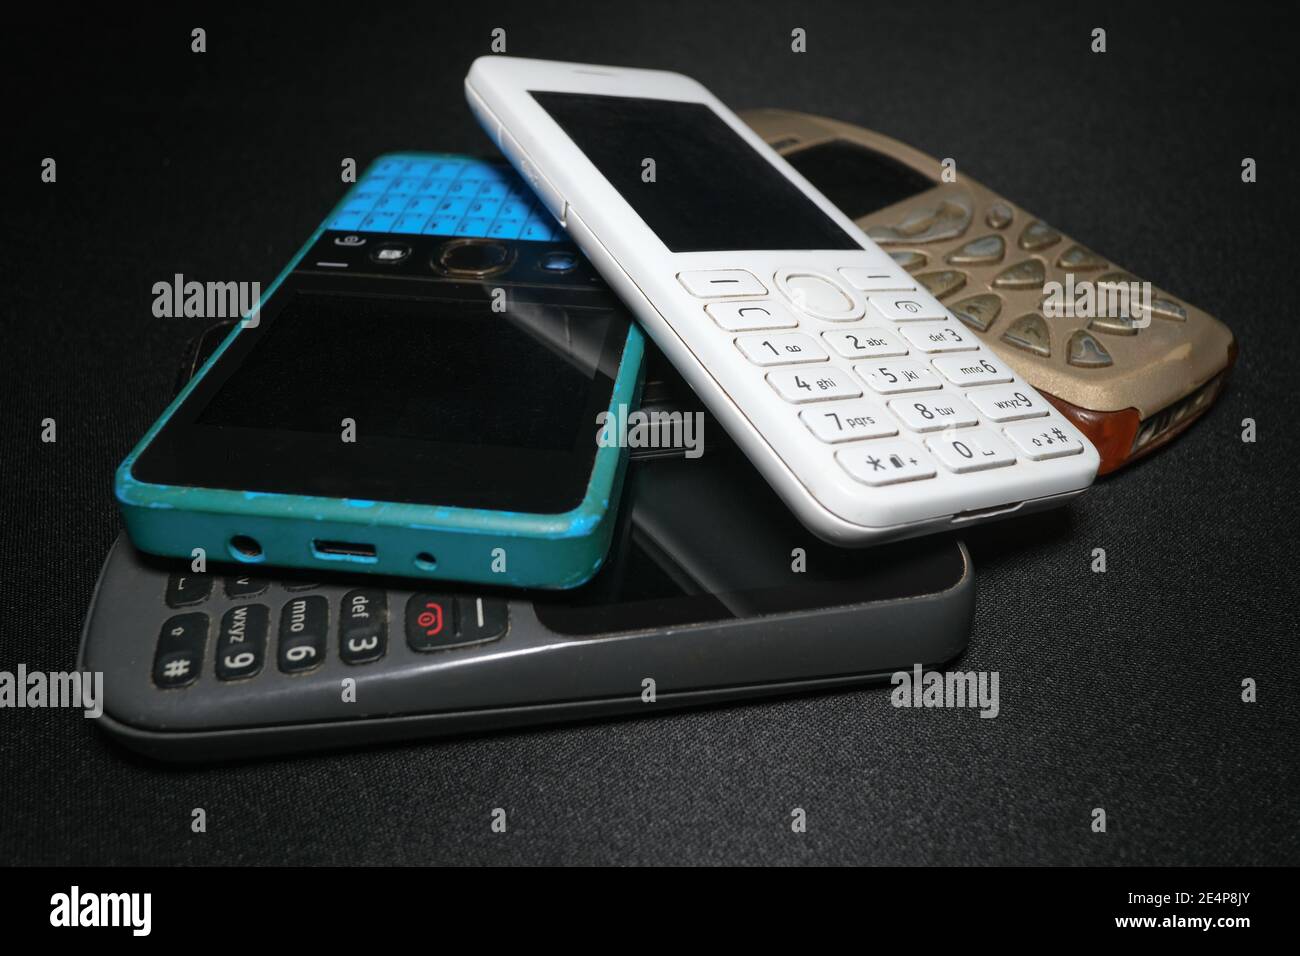 Pile of old gen mobile phones devices,technology evolution concept Stock Photo